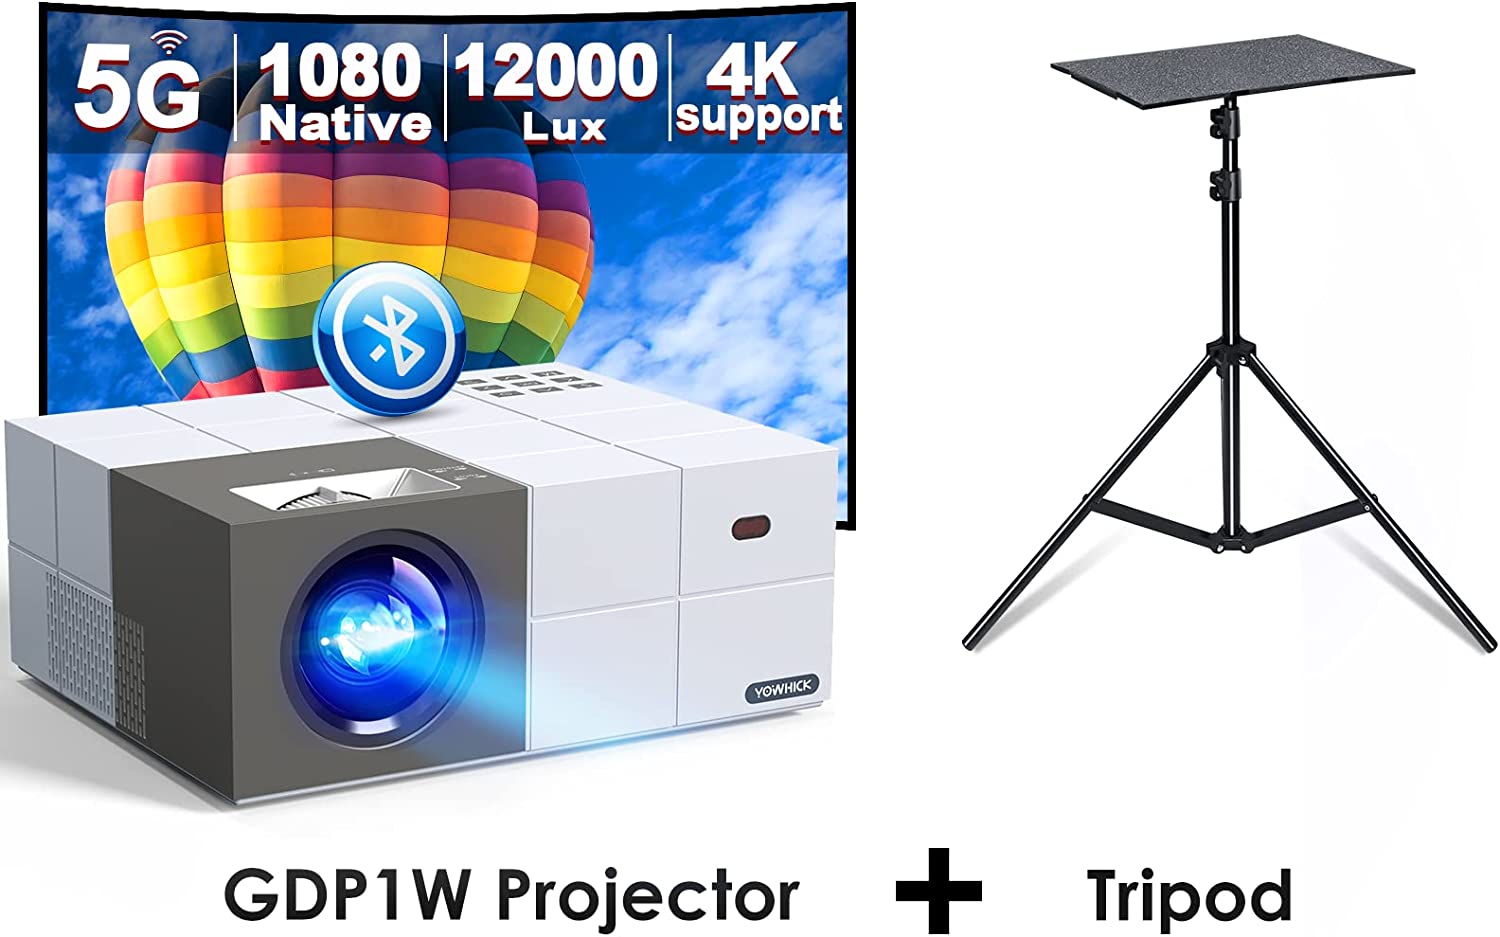 Native 1080P 5G WiFi Bluetooth Projector 4K Support, GDP1W Outdoor  Projector White